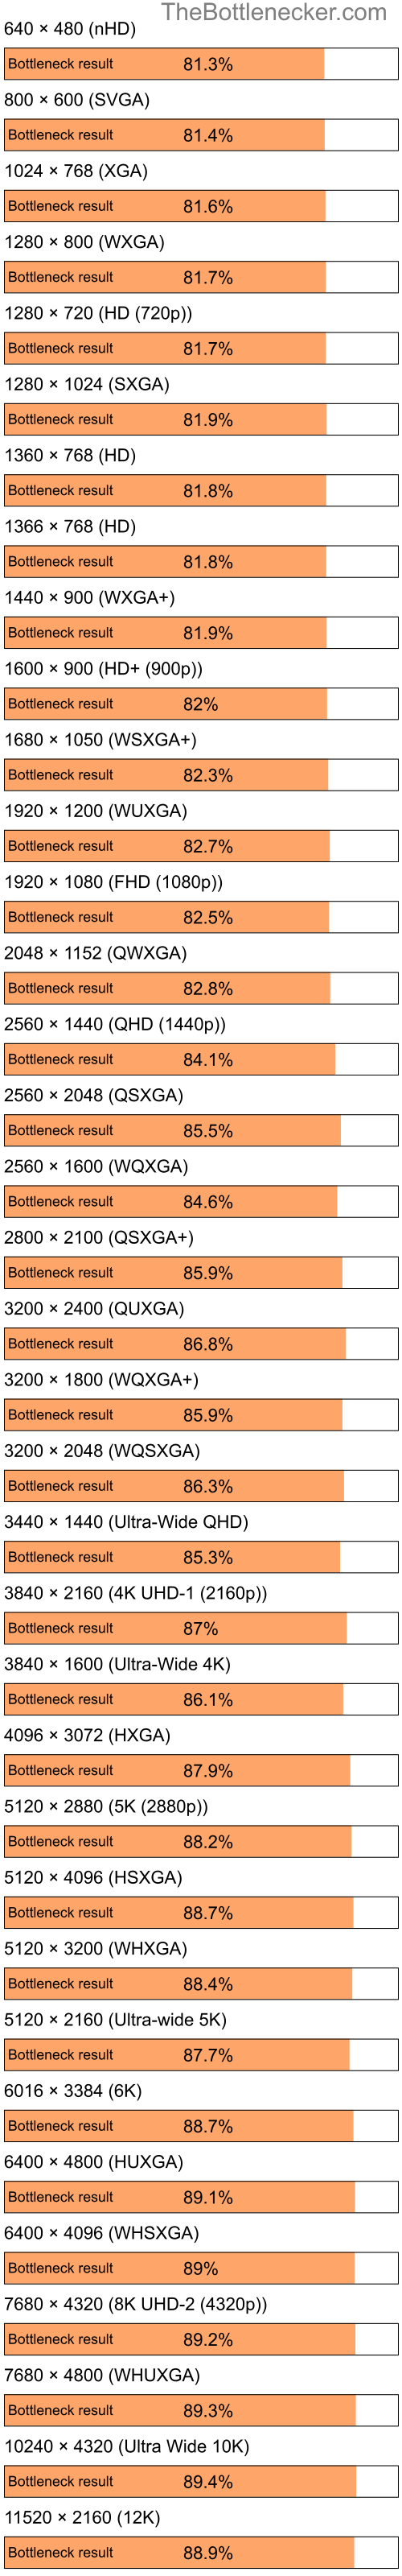 Bottleneck results by resolution for Intel Celeron M 410 and AMD Mobility Radeon 9700 in Graphic Card Intense Tasks